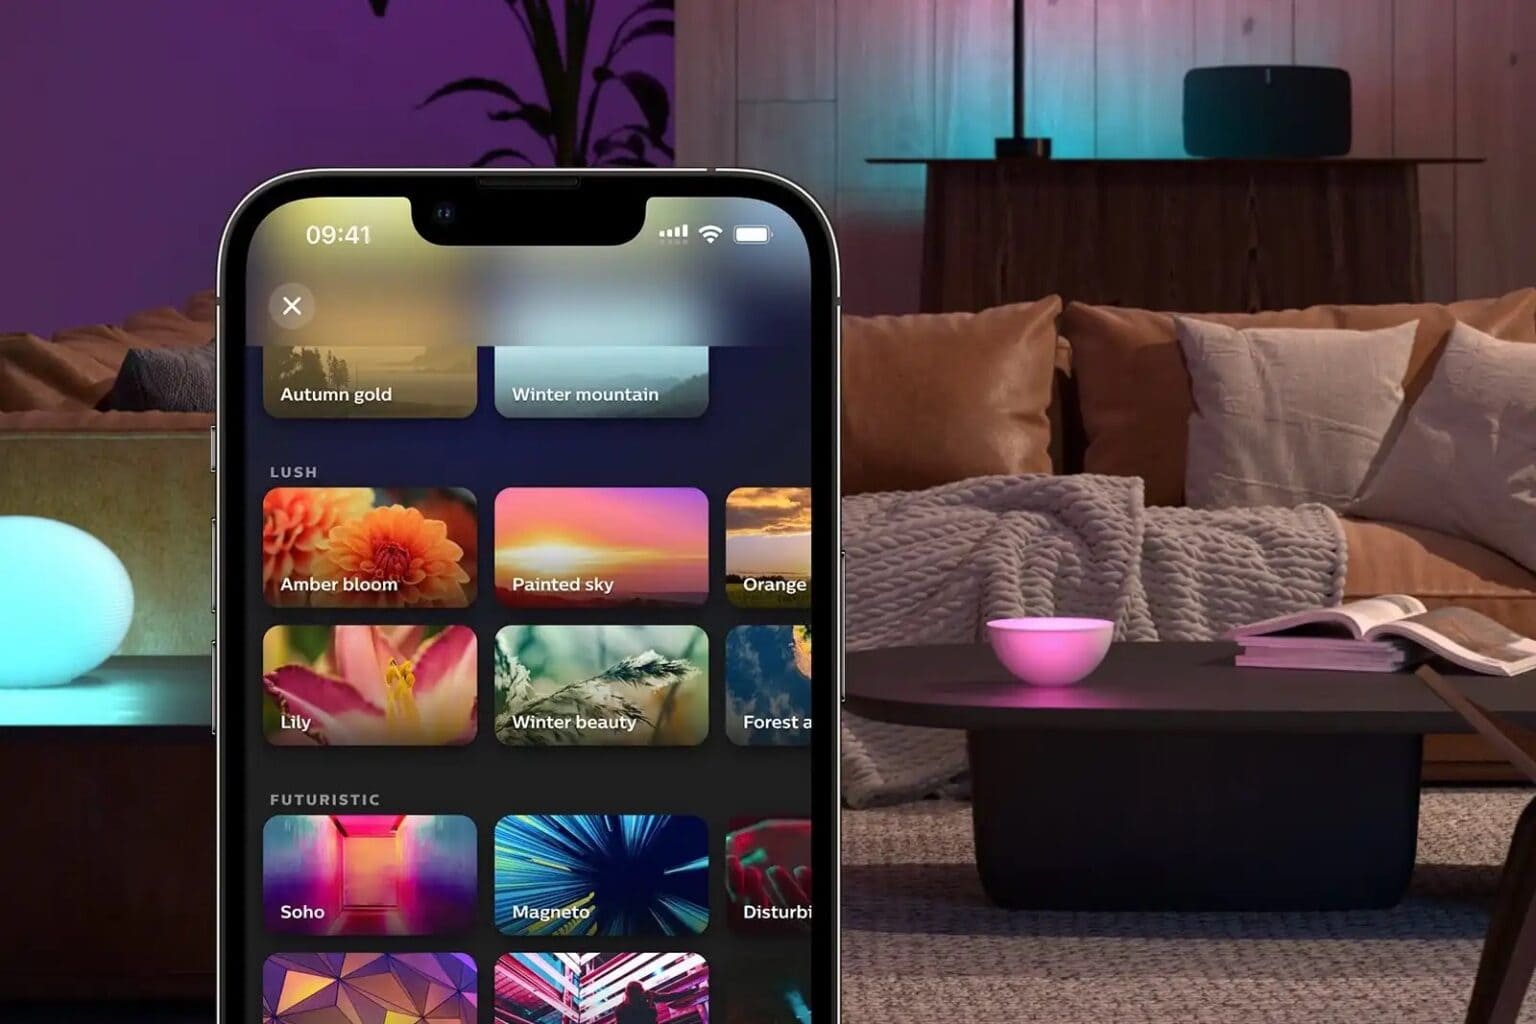 Now you've got 12 new color schemes to play with in your HomeKit lighting.